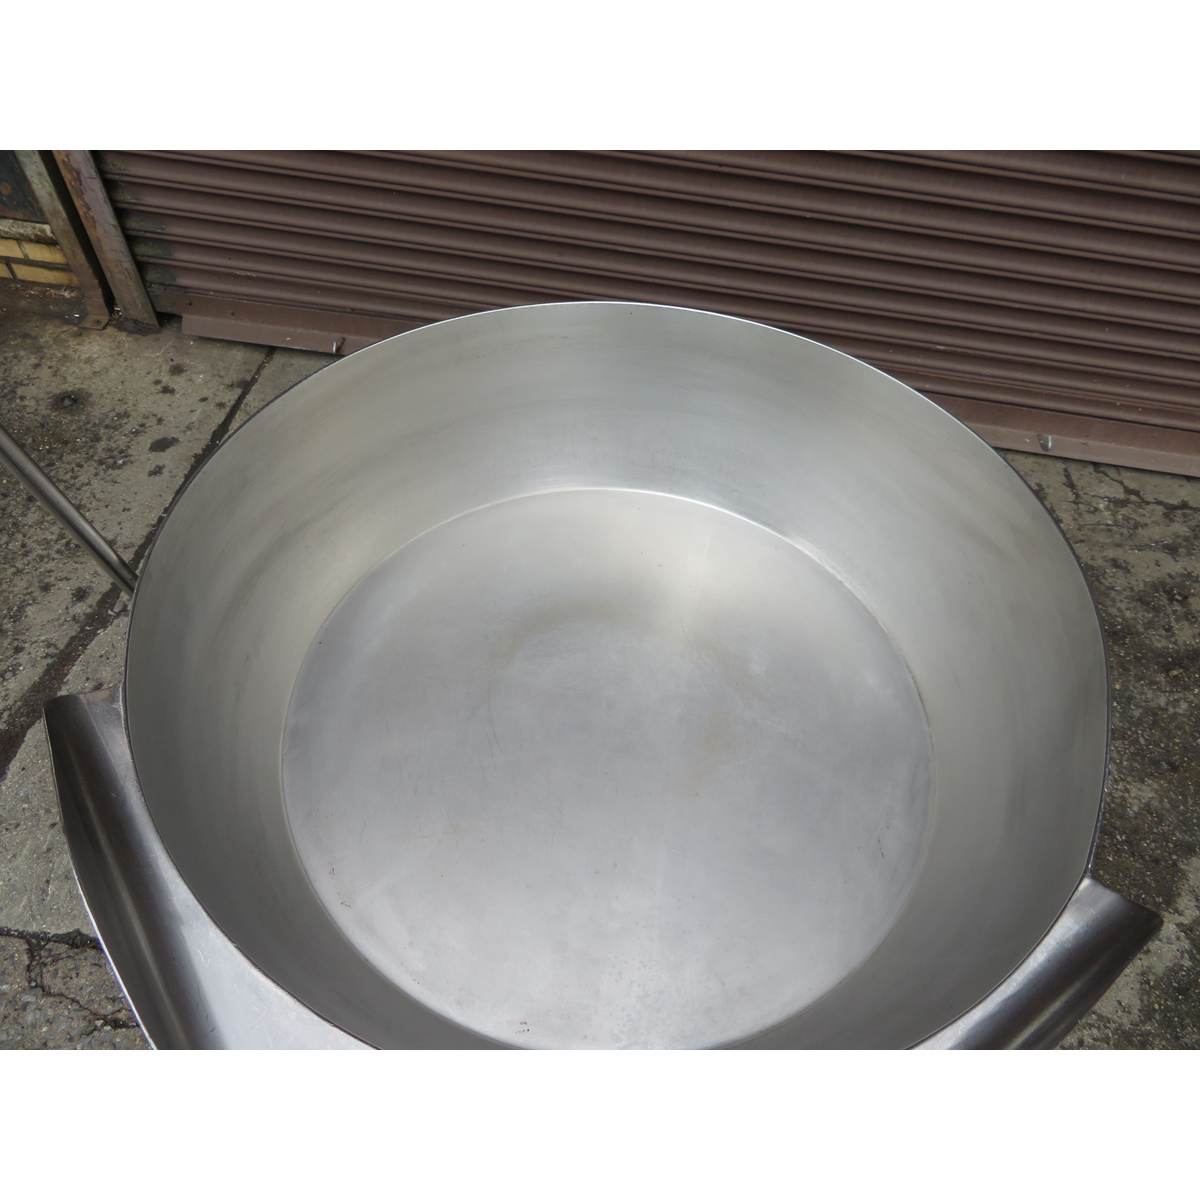 Cleveland SET15 Electric Titling Skillet 15 Gallon, Used Great Condition image 3